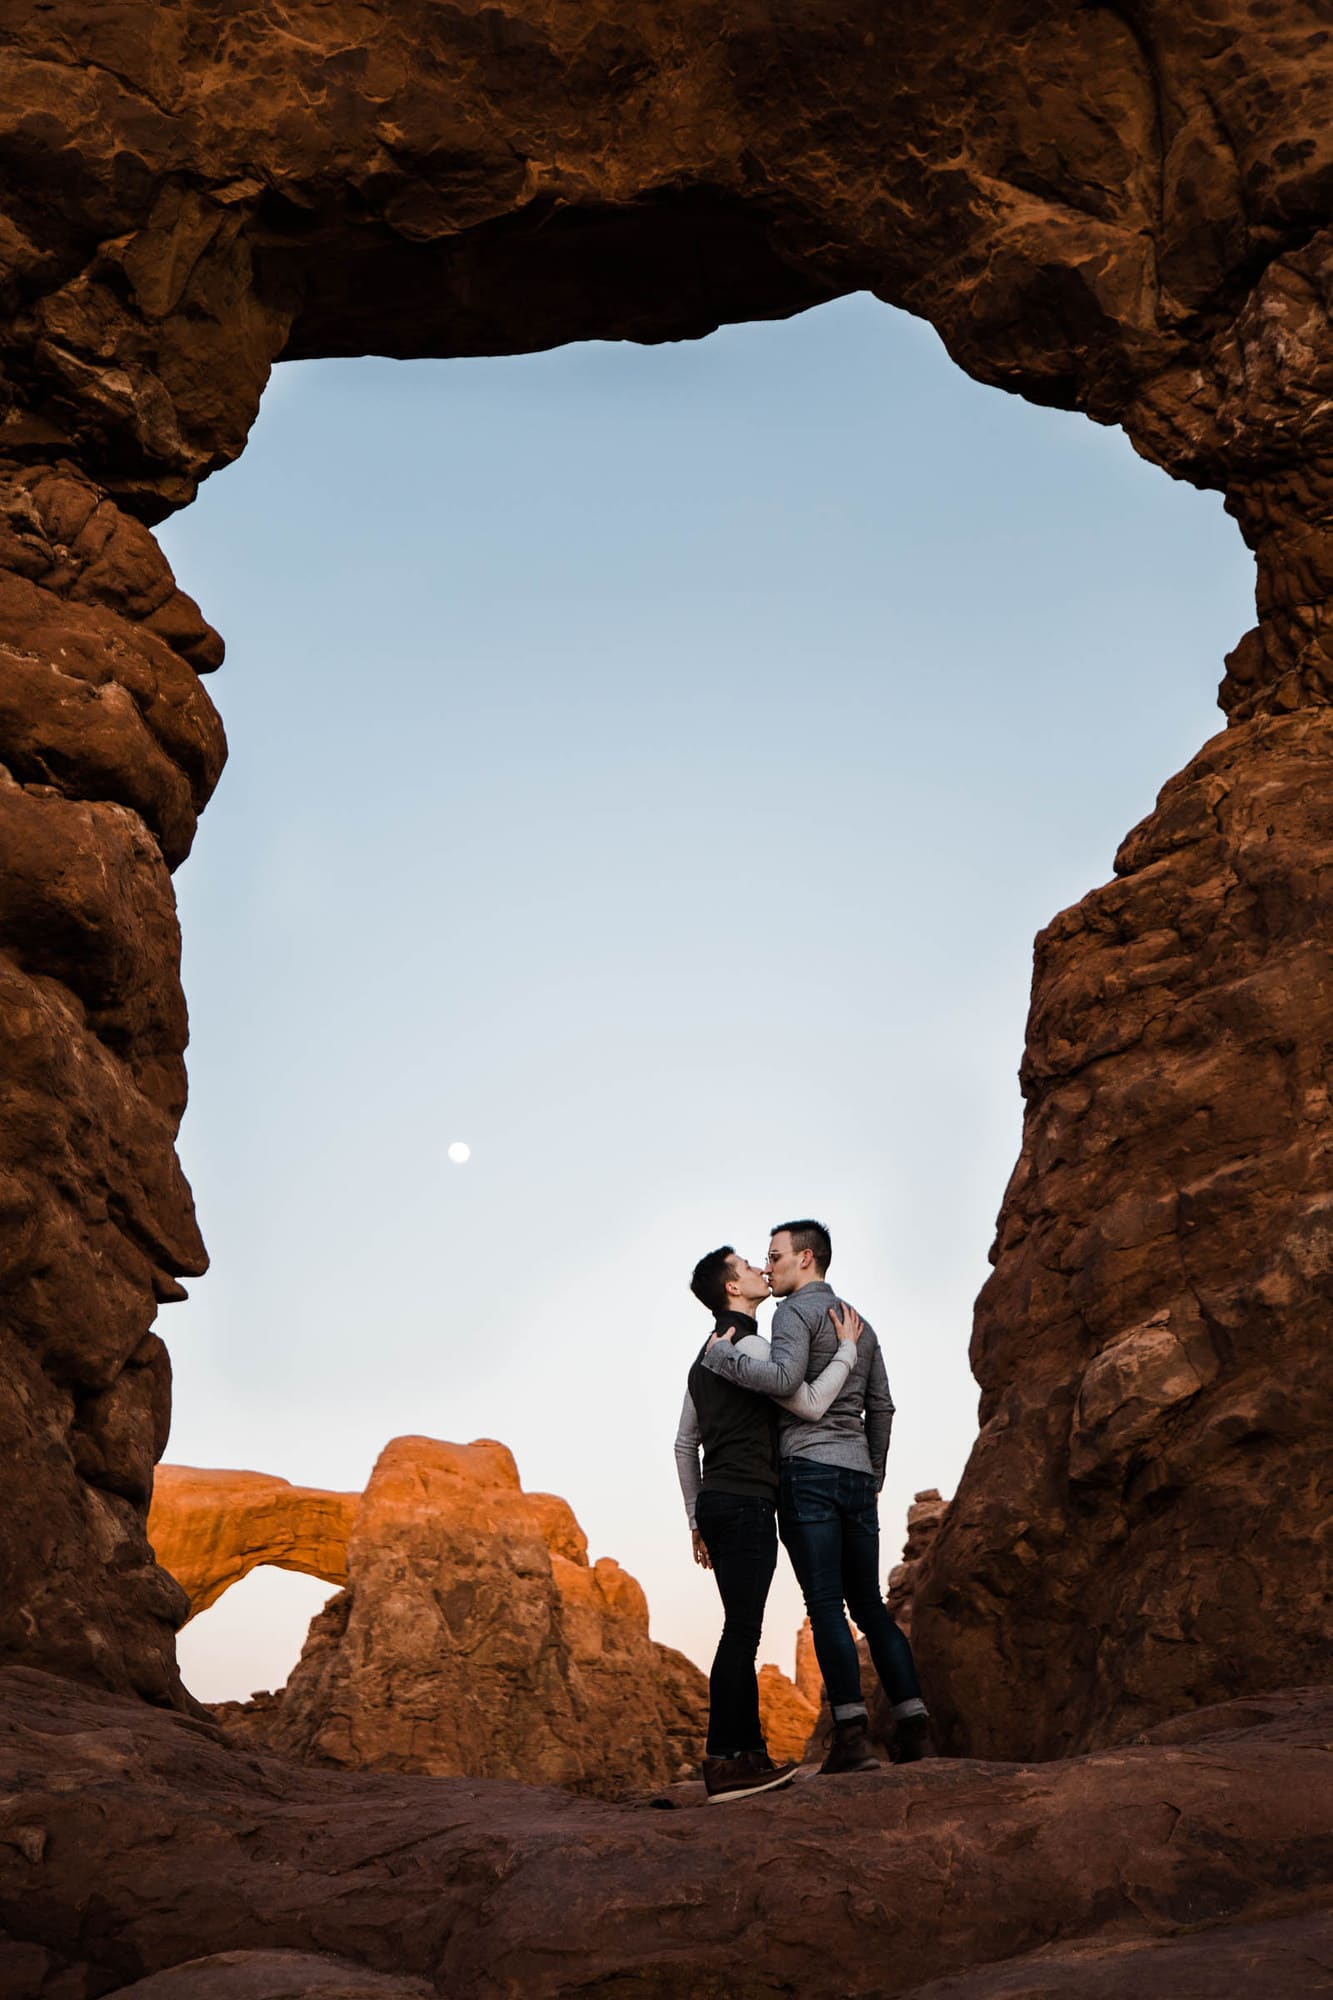 This couple had an EPIC adventure- deciding to have a Moab *and* Dunton Hot Springs wedding celebration to honor their recent nuptials.